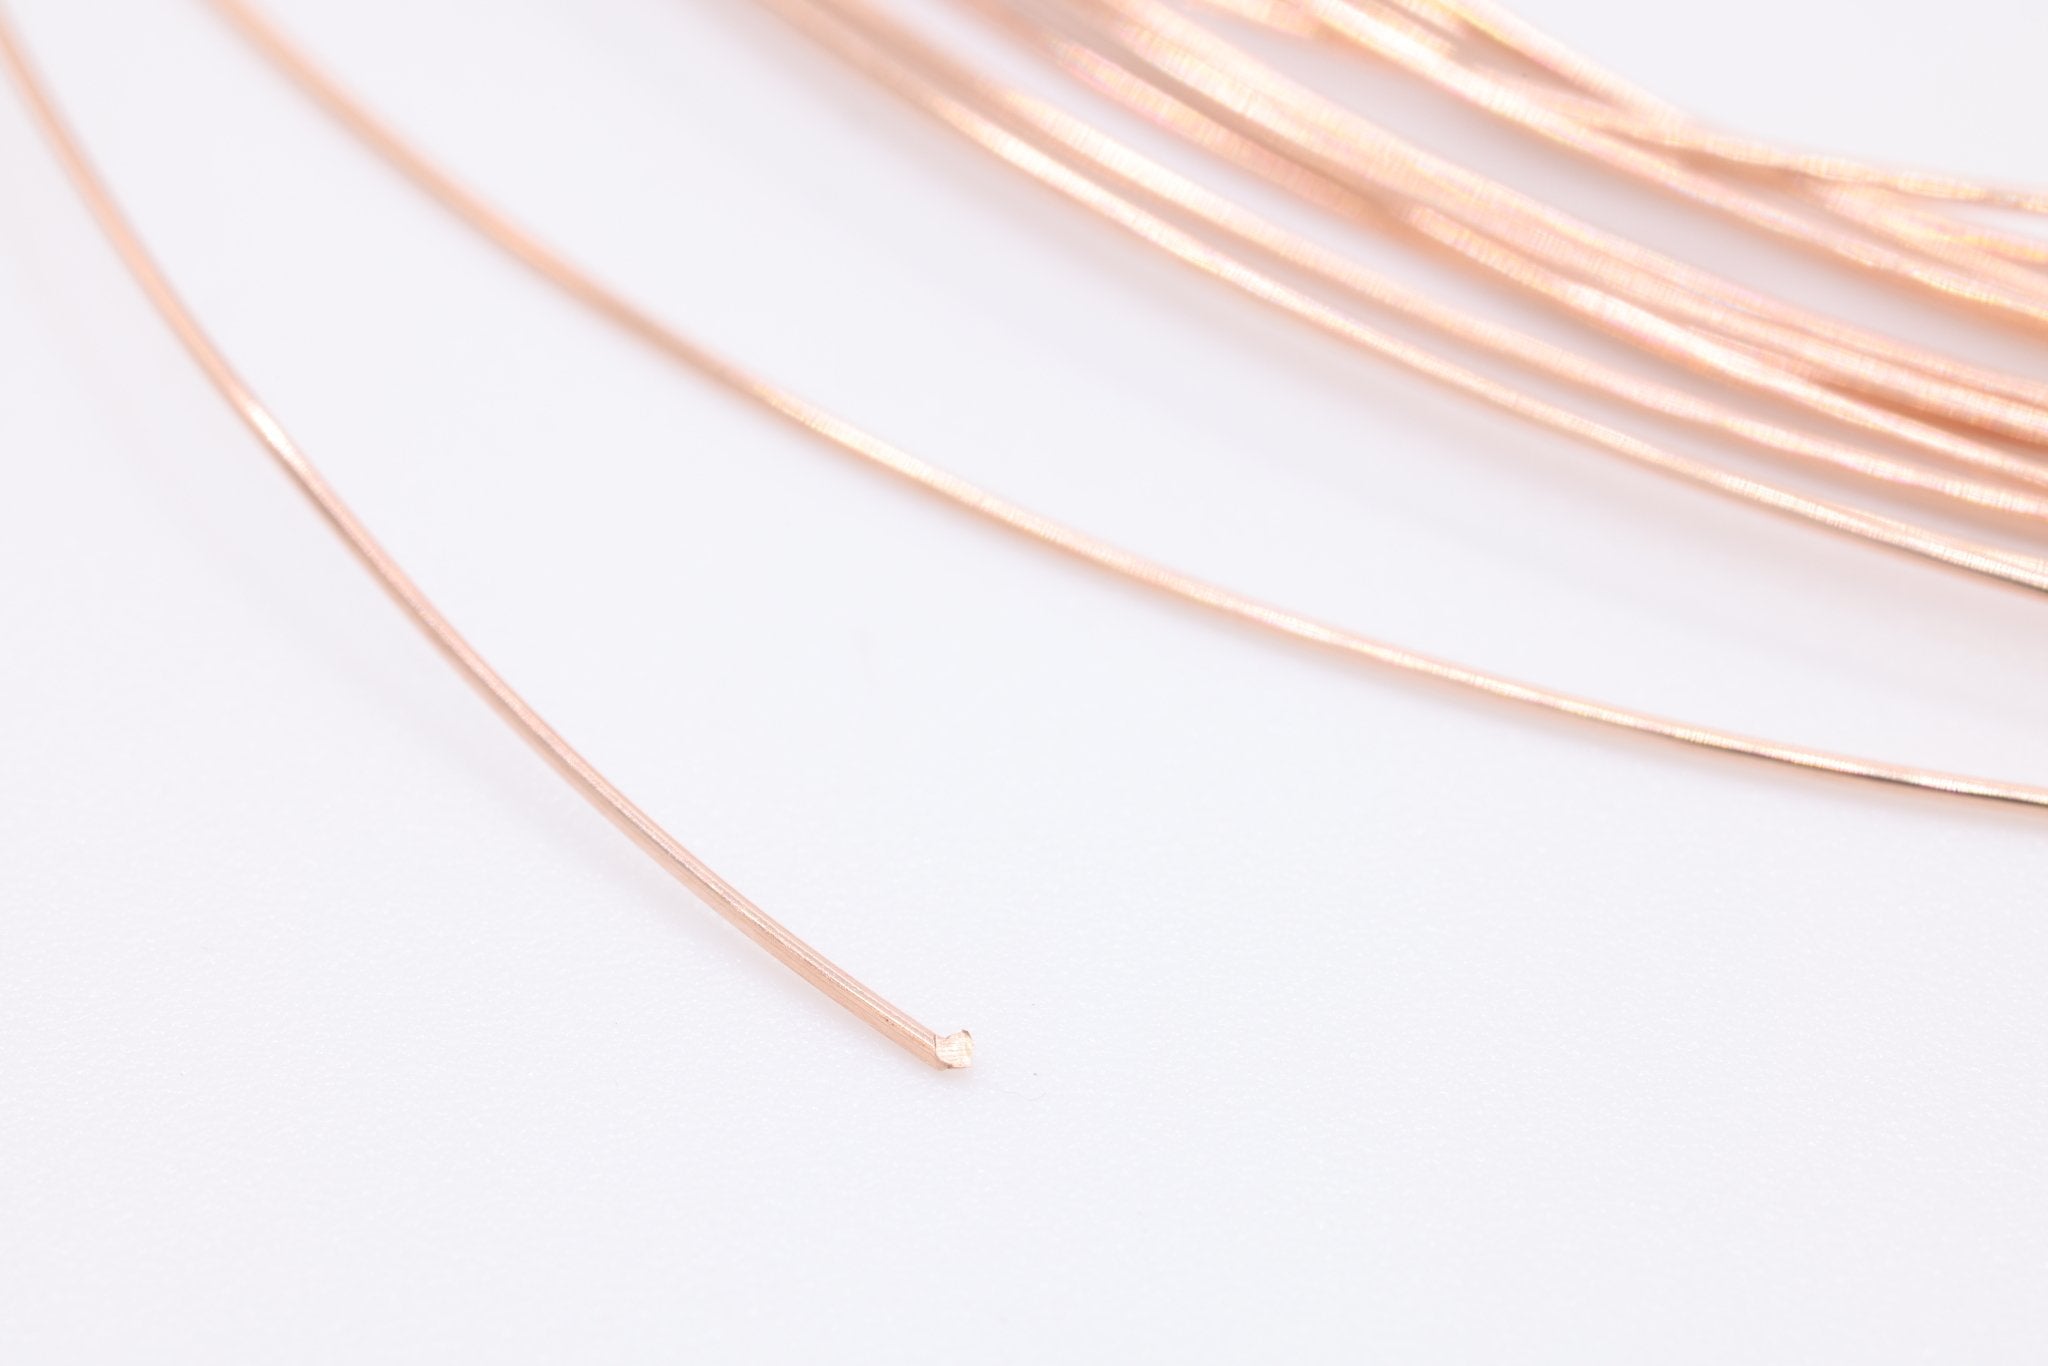 Rose Gold Filled Wire, 26 Gauge 0.4mm, Rose Gold-Filled, Half Hard Jewelry Wire - HarperCrown